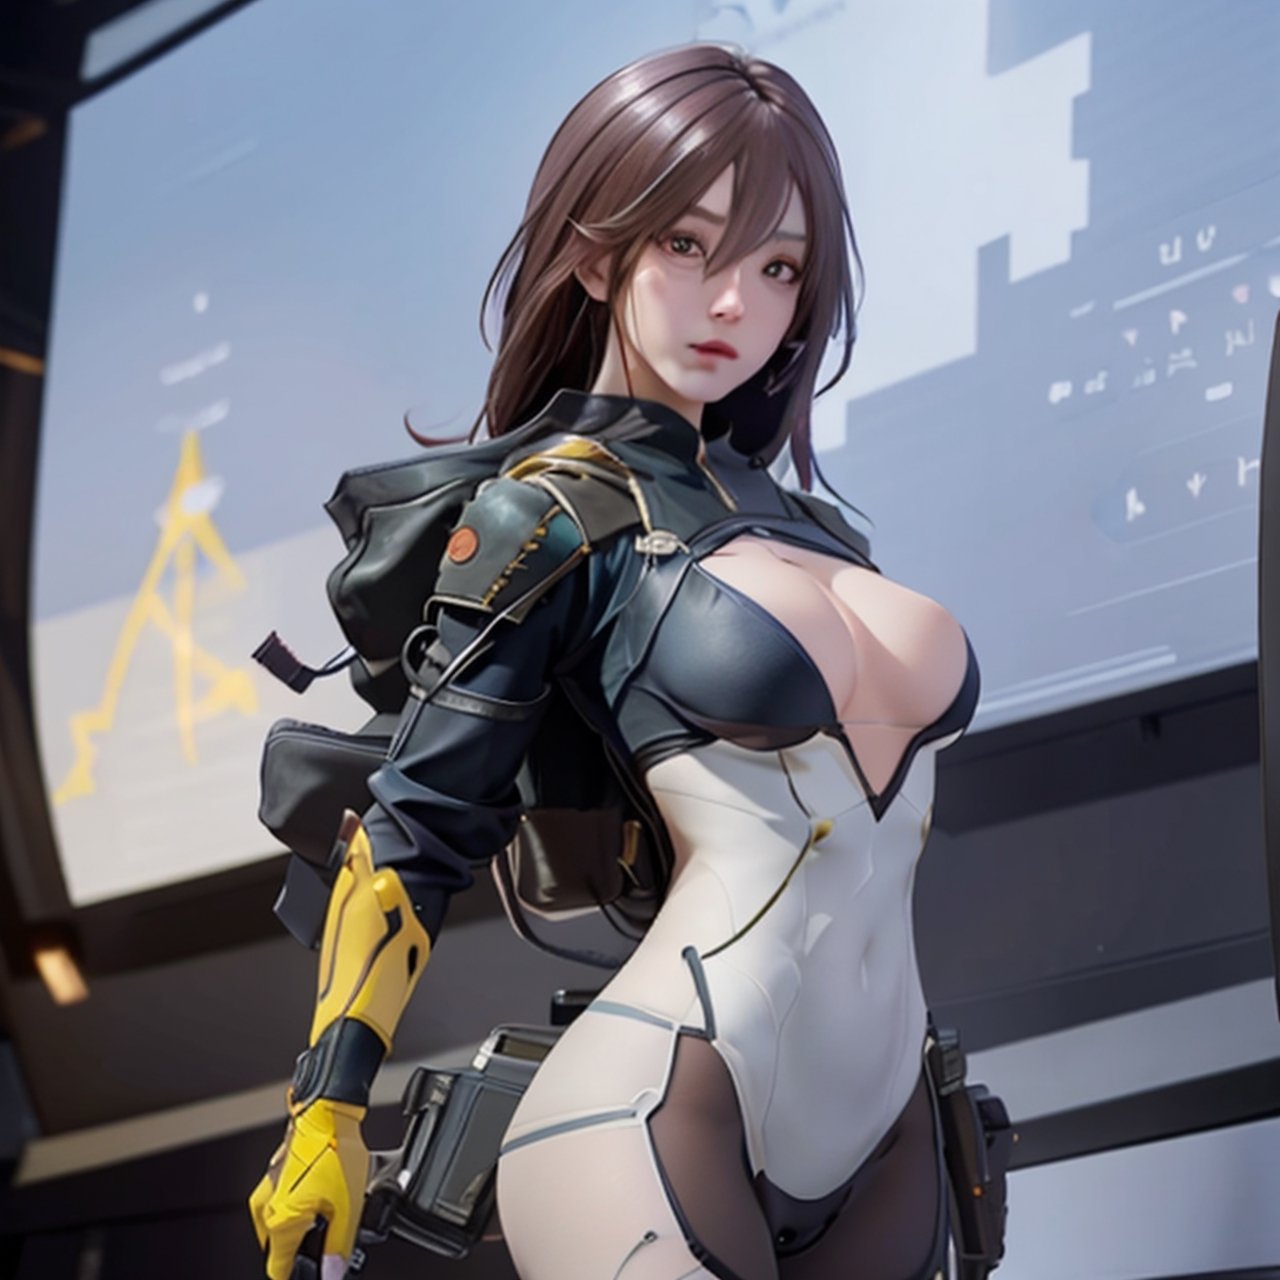 A lone mature girl, Waist long light brownr hair, , Gold eyes, yellow eyes, Beautiful face, masterpiece, best quality, expressive eyes, perfect face,clear headgear, Short sword, , white rubber skin tight suit, yellow glove, full leg white stocking, exposed chest, ((masterpiece)), 3D, HDR (High Dynamic Range),Ray Tracing, NVIDIA RTX, Super-Resolution, Unreal 5,Subsurface scattering, PBR Texturing, Post-processing, Anisotropic Filtering, Depth-of-field, Maximum clarity and sharpness, Multi-layered textures, Albedo and Specular maps, Surface shading, Accurate simulation of light-material interaction, Perfect proportions, Octane Render, Two-tone lighting, Wide aperture, Low ISO, White balance, Rule of thirds,8K RAW, Aura, masterpiece, best quality, Mysterious expression, magical effects like sparkles or energy, flowing robes or enchanting attire, mechanic creatures or mystical background, rim lighting, side lighting, cinematic light, ultra high res, 8k uhd, film grain, best shadow, delicate, RAW, light particles, detailed skin texture, detailed cloth texture, 